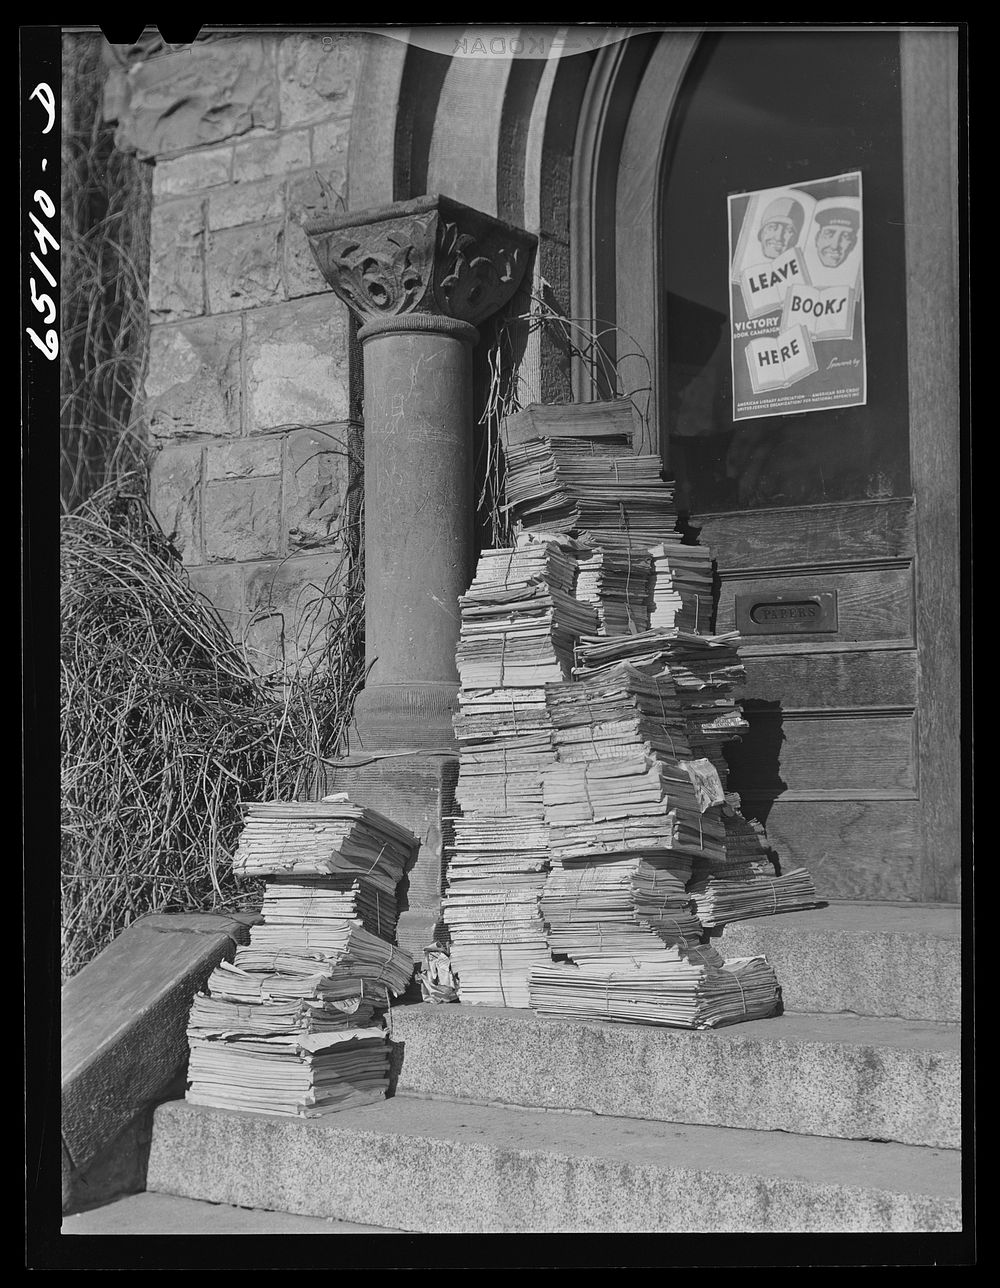 Dillon, Montana. Magazines left for soldiers at public library. Sourced from the Library of Congress.